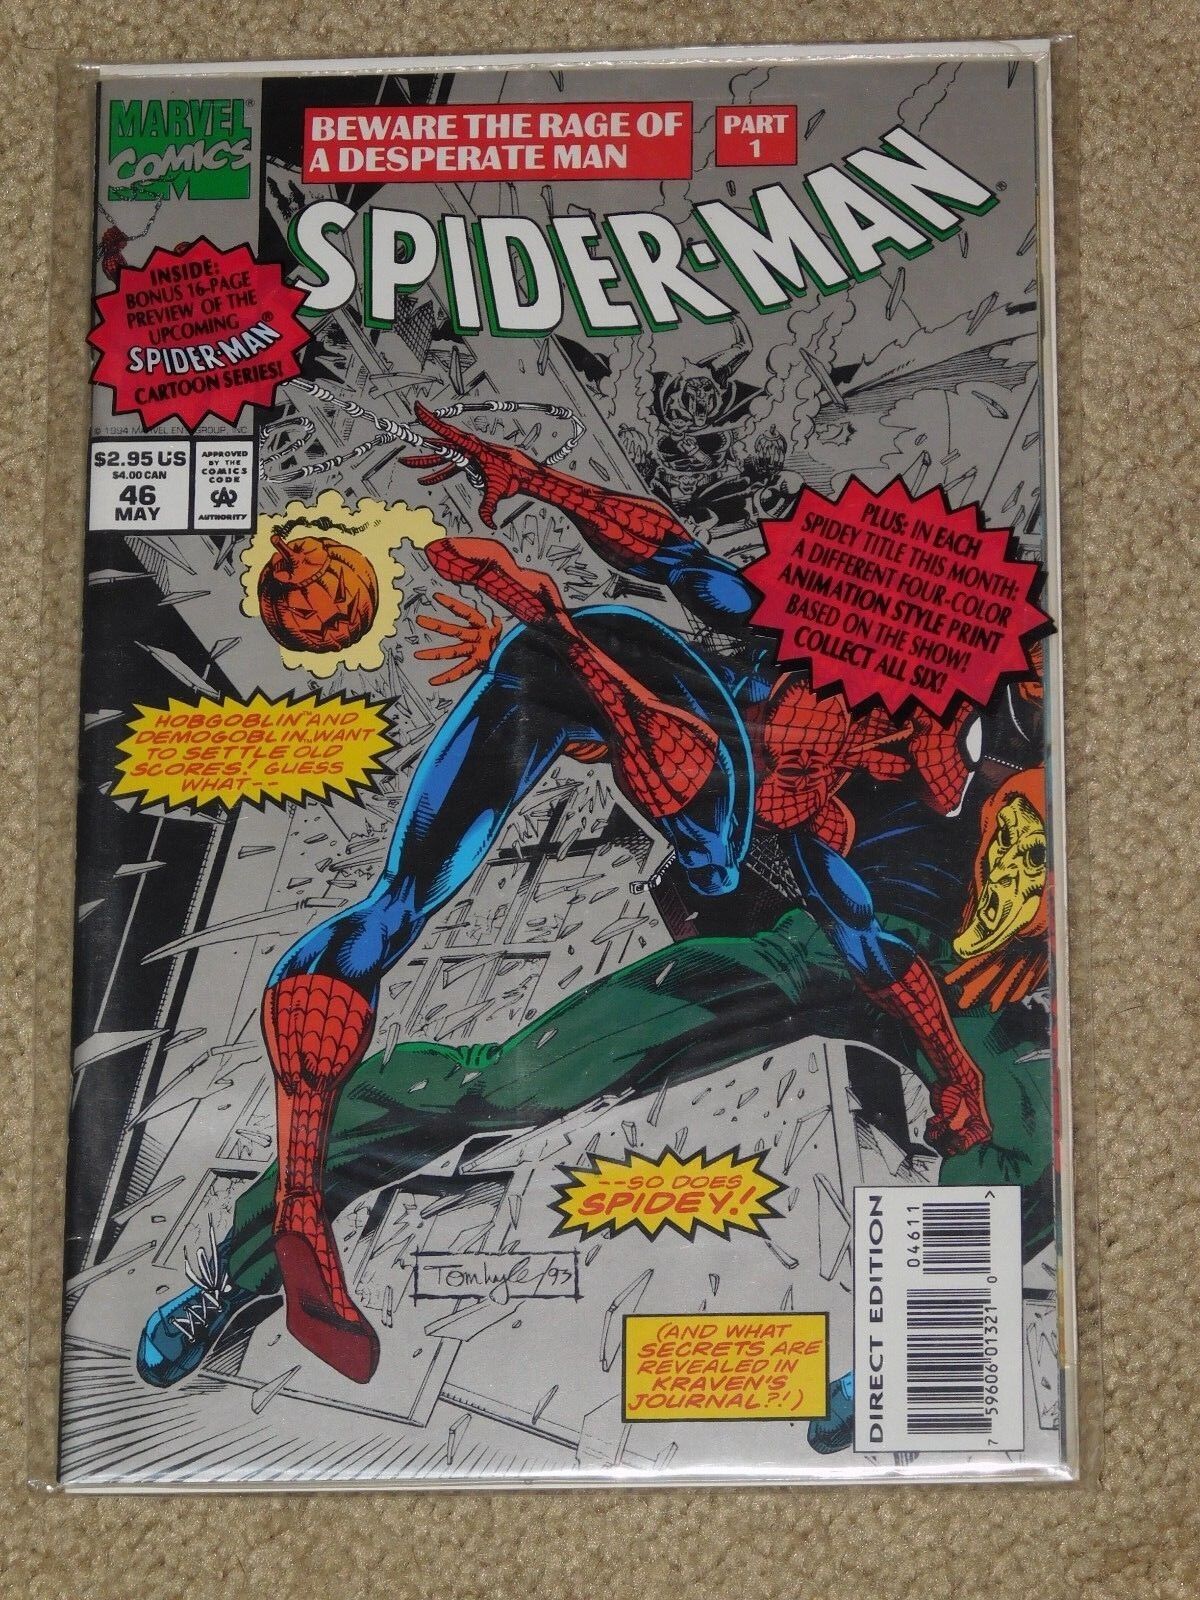 MARVEL COMICS SPIDER-MAN BEWARE THE RAGE OF A DESPERATE MAN PART 1 #46 MAY